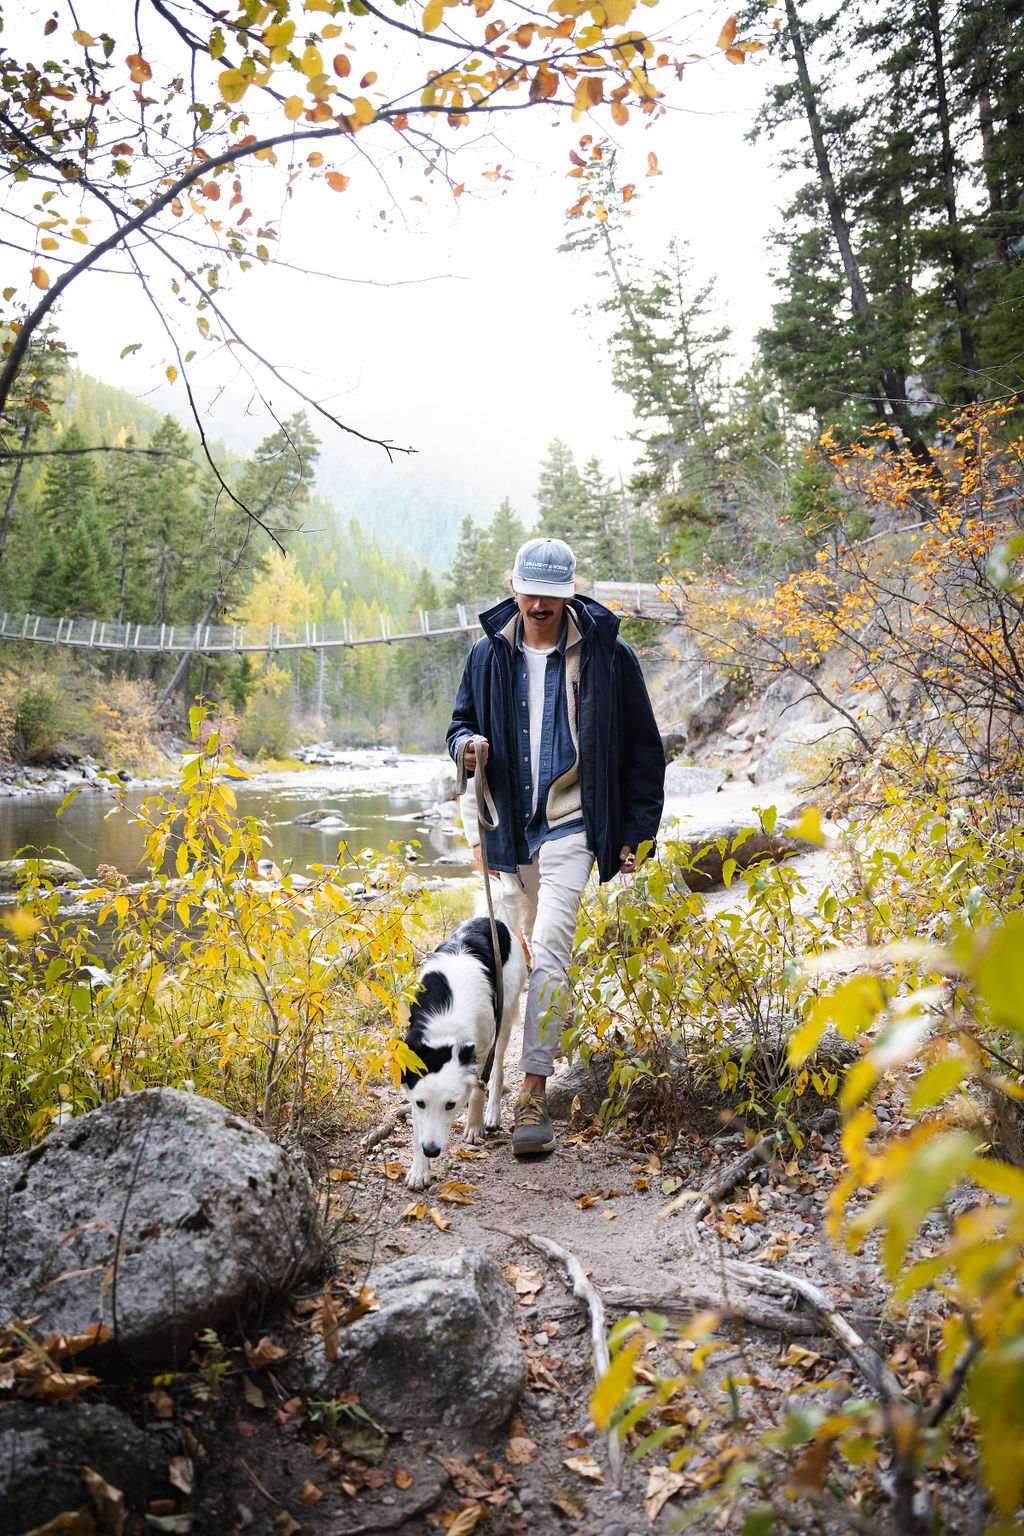 The featured image shows a person wearing Forsake shoes while walking a dog on a hiking path.